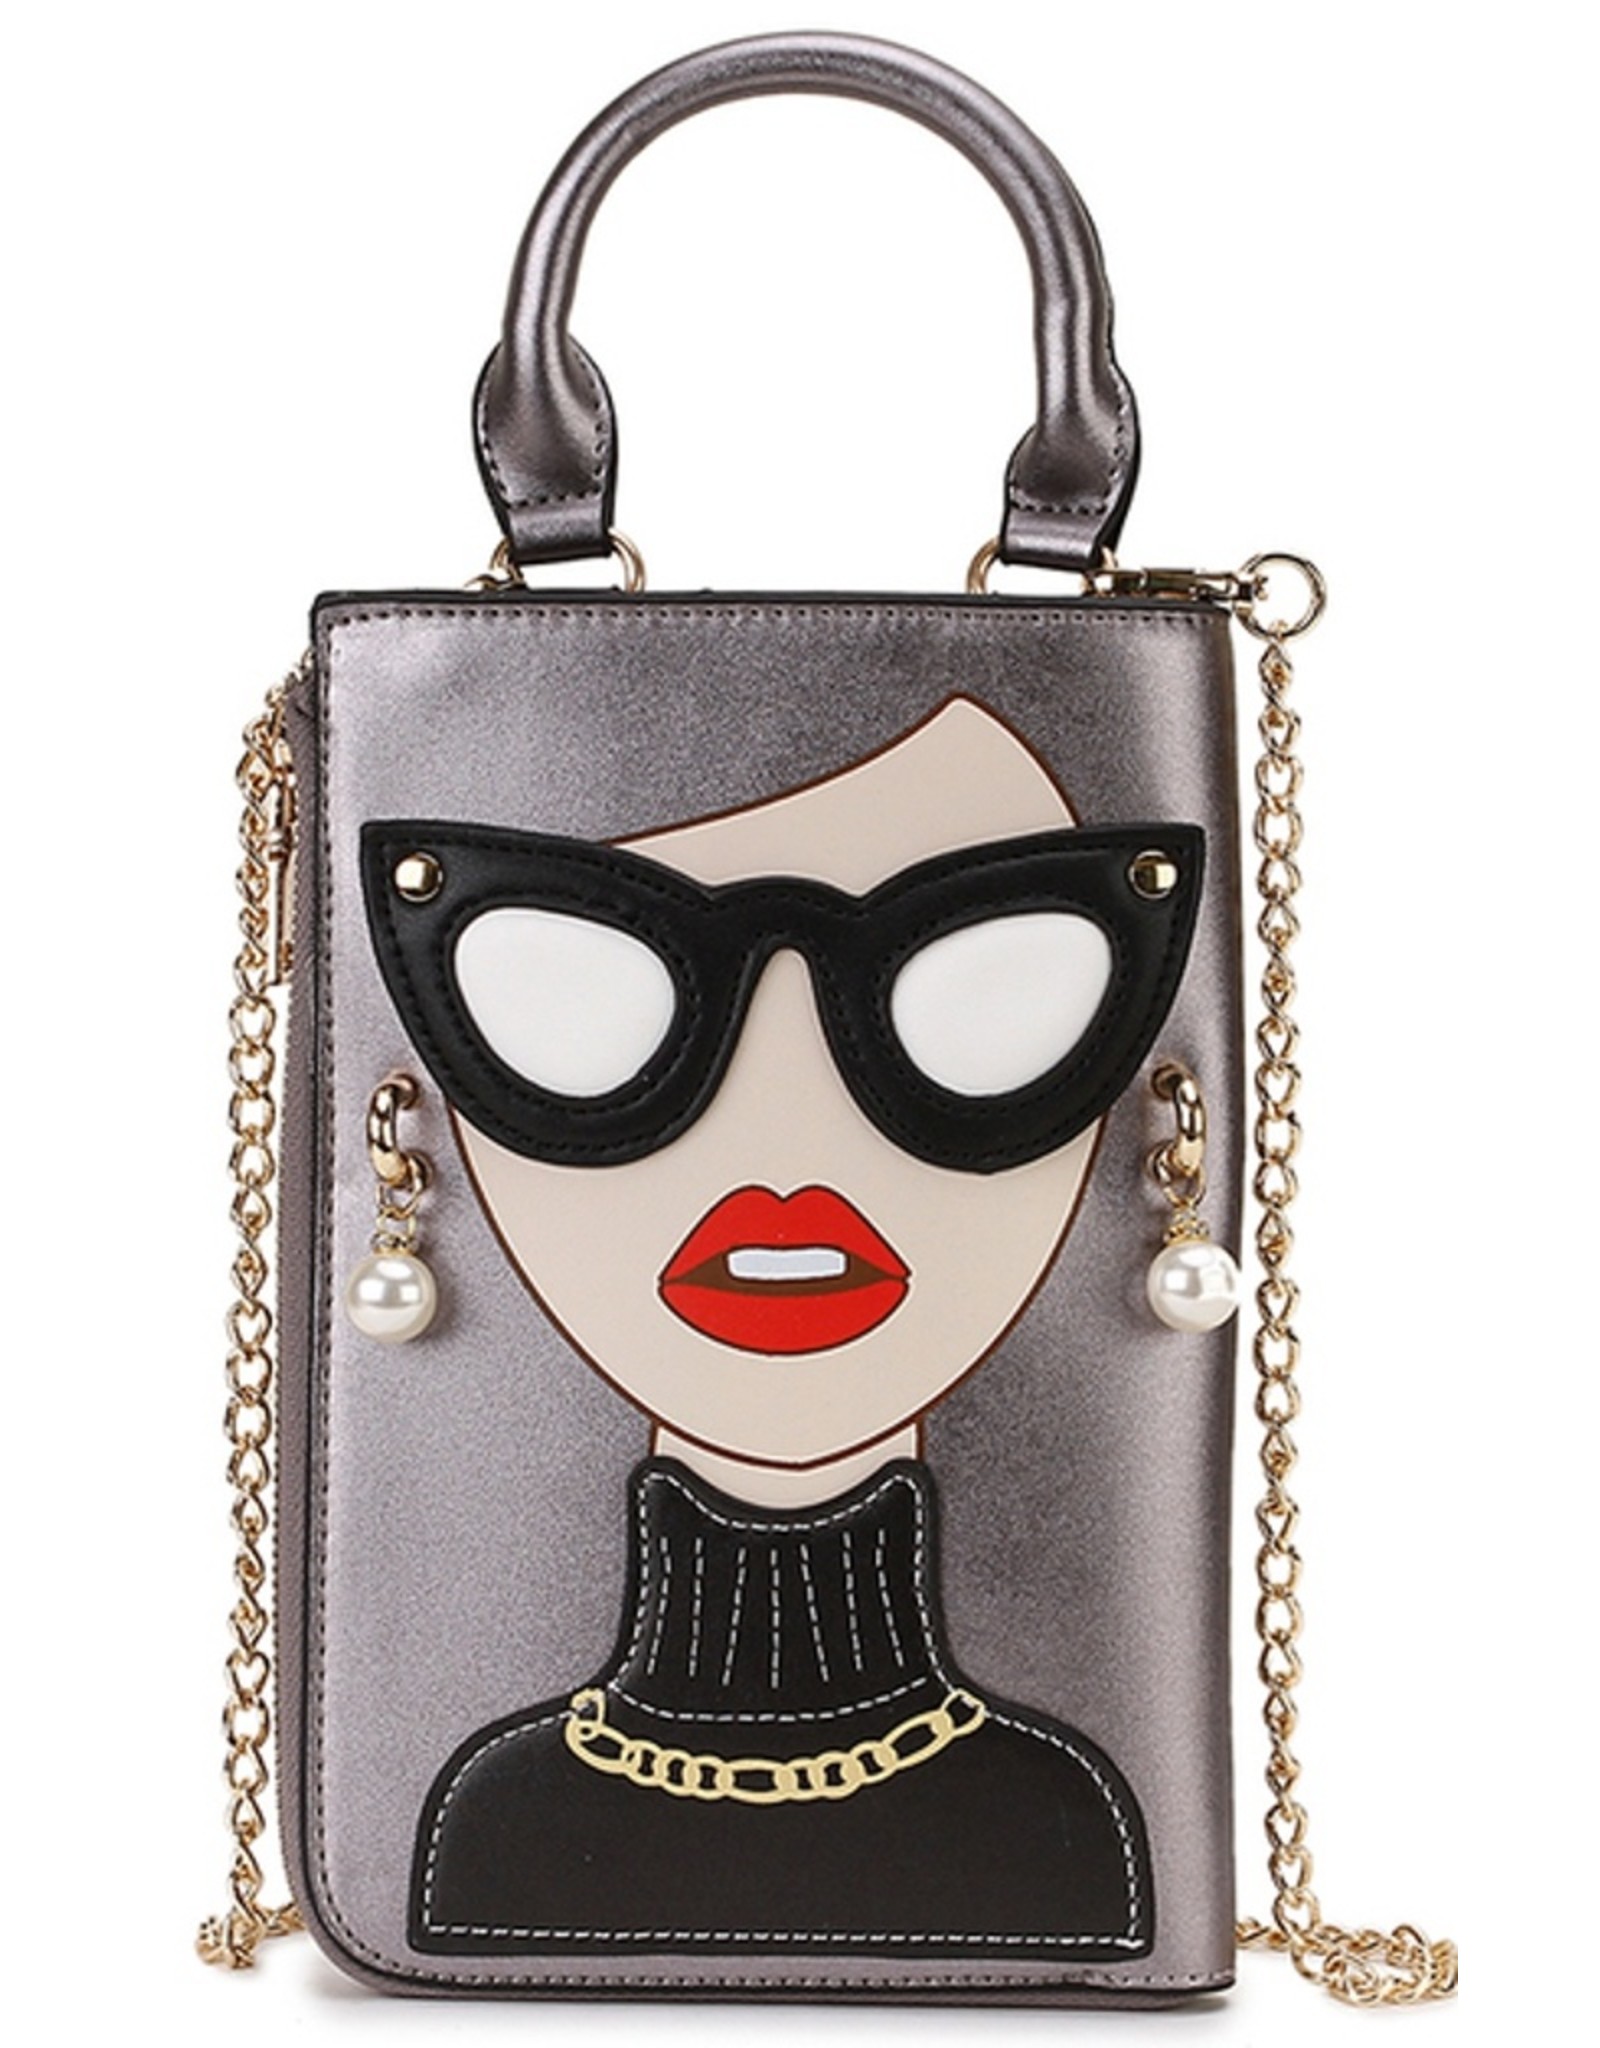 Trukado Fantasy bags - Fantasy clutch Ladies Face with earrings and sunglasses